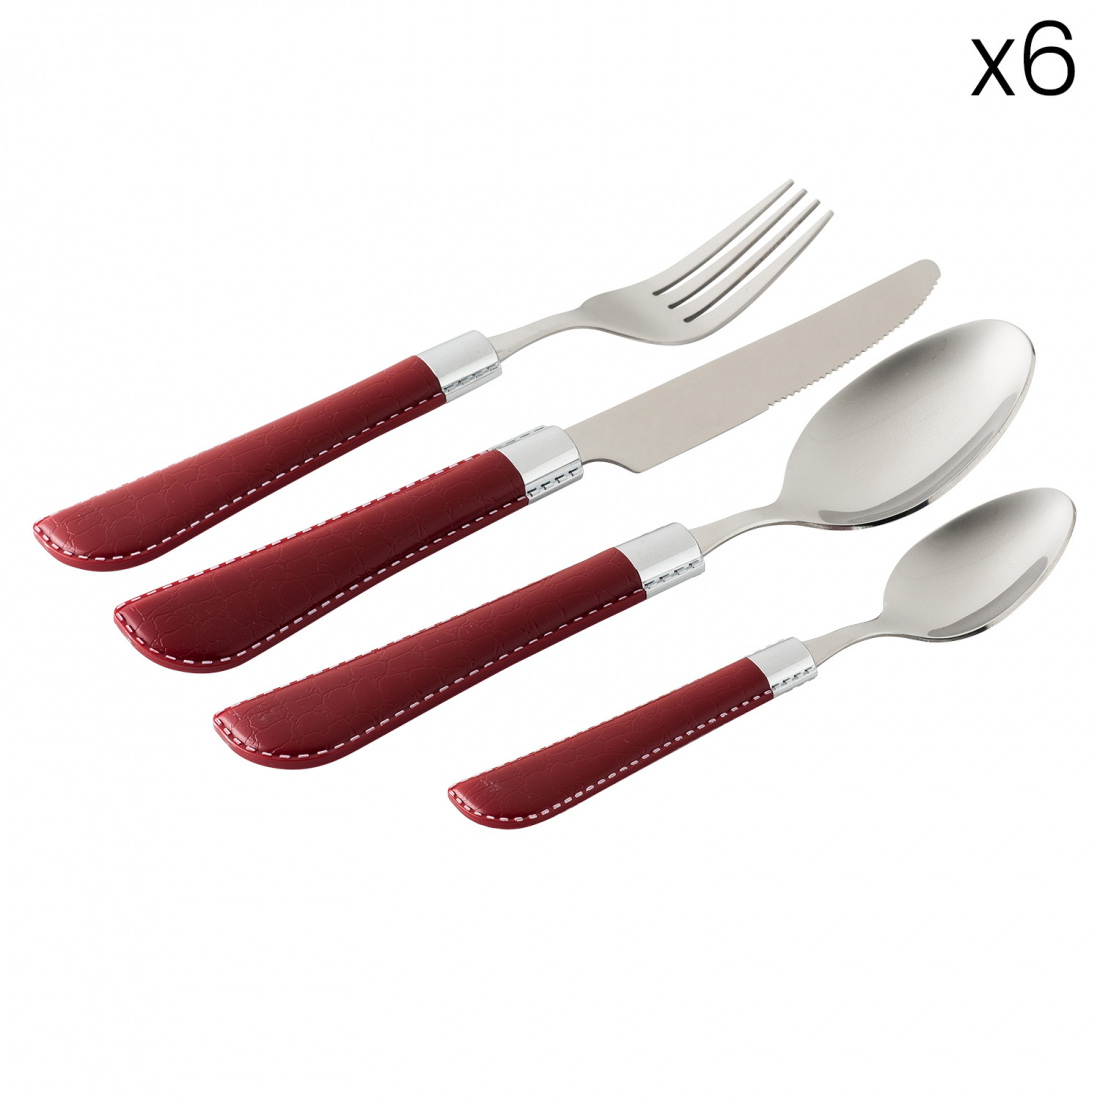 Aramis 24 Pieces Cutlery Set - Red